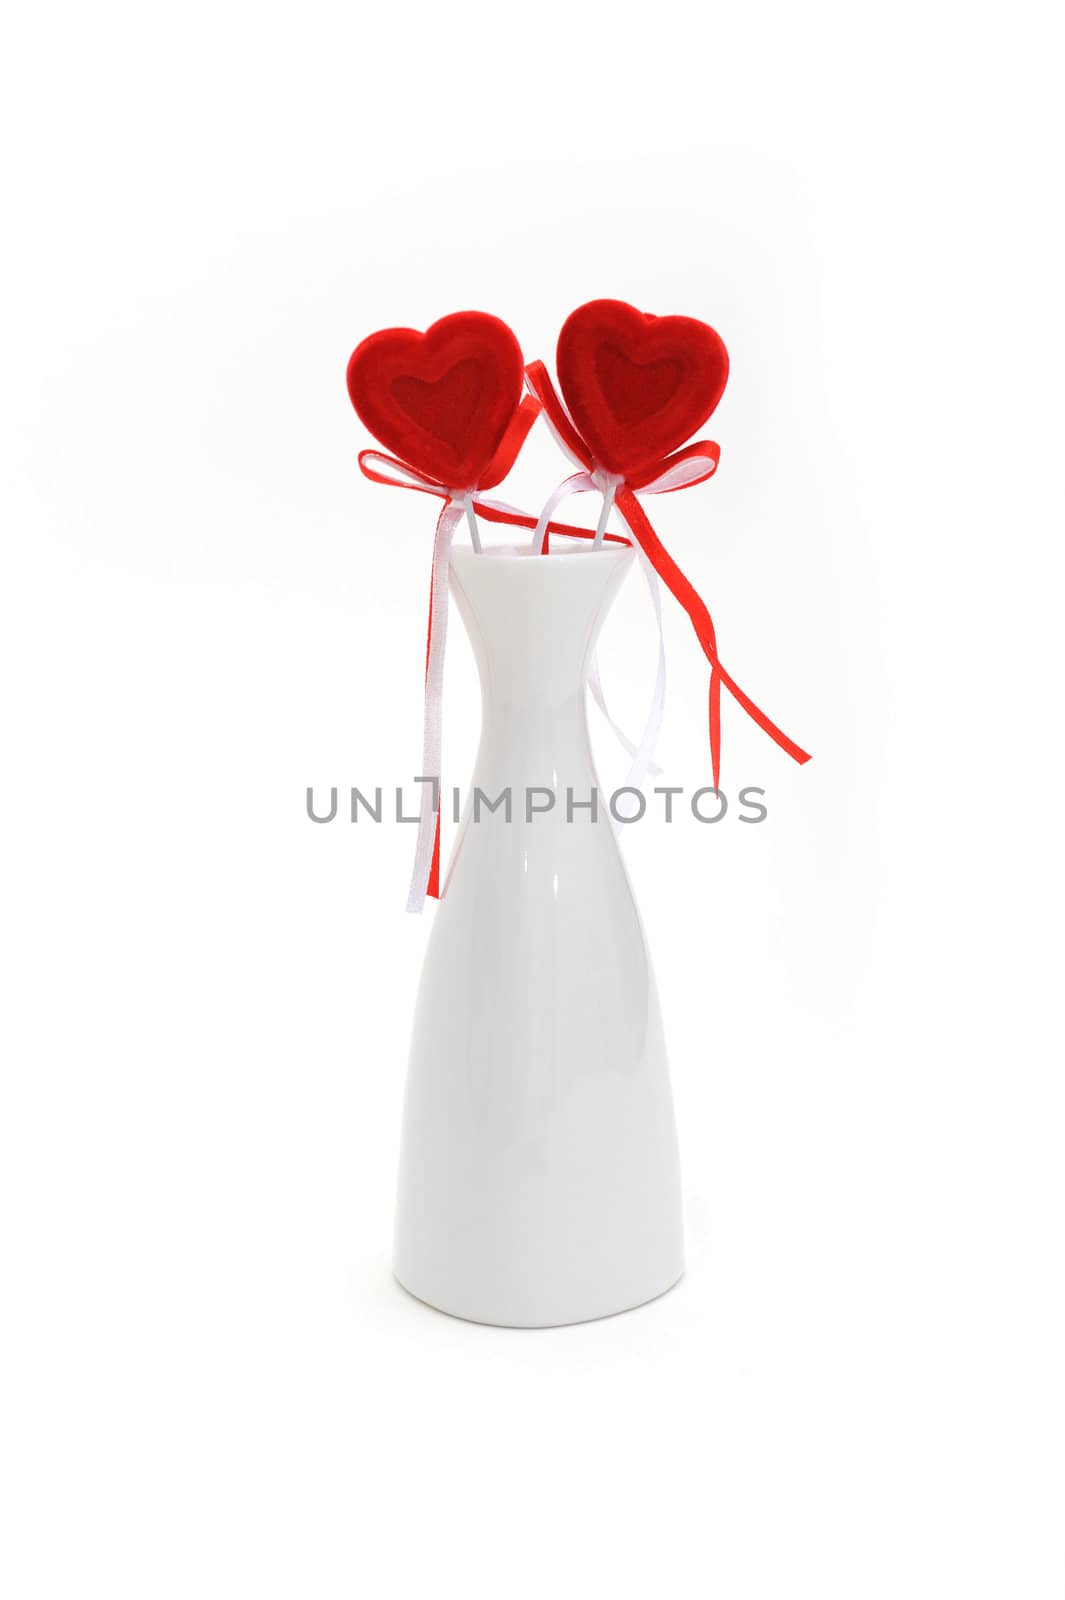 Two red plush hearts in white vase on white background.